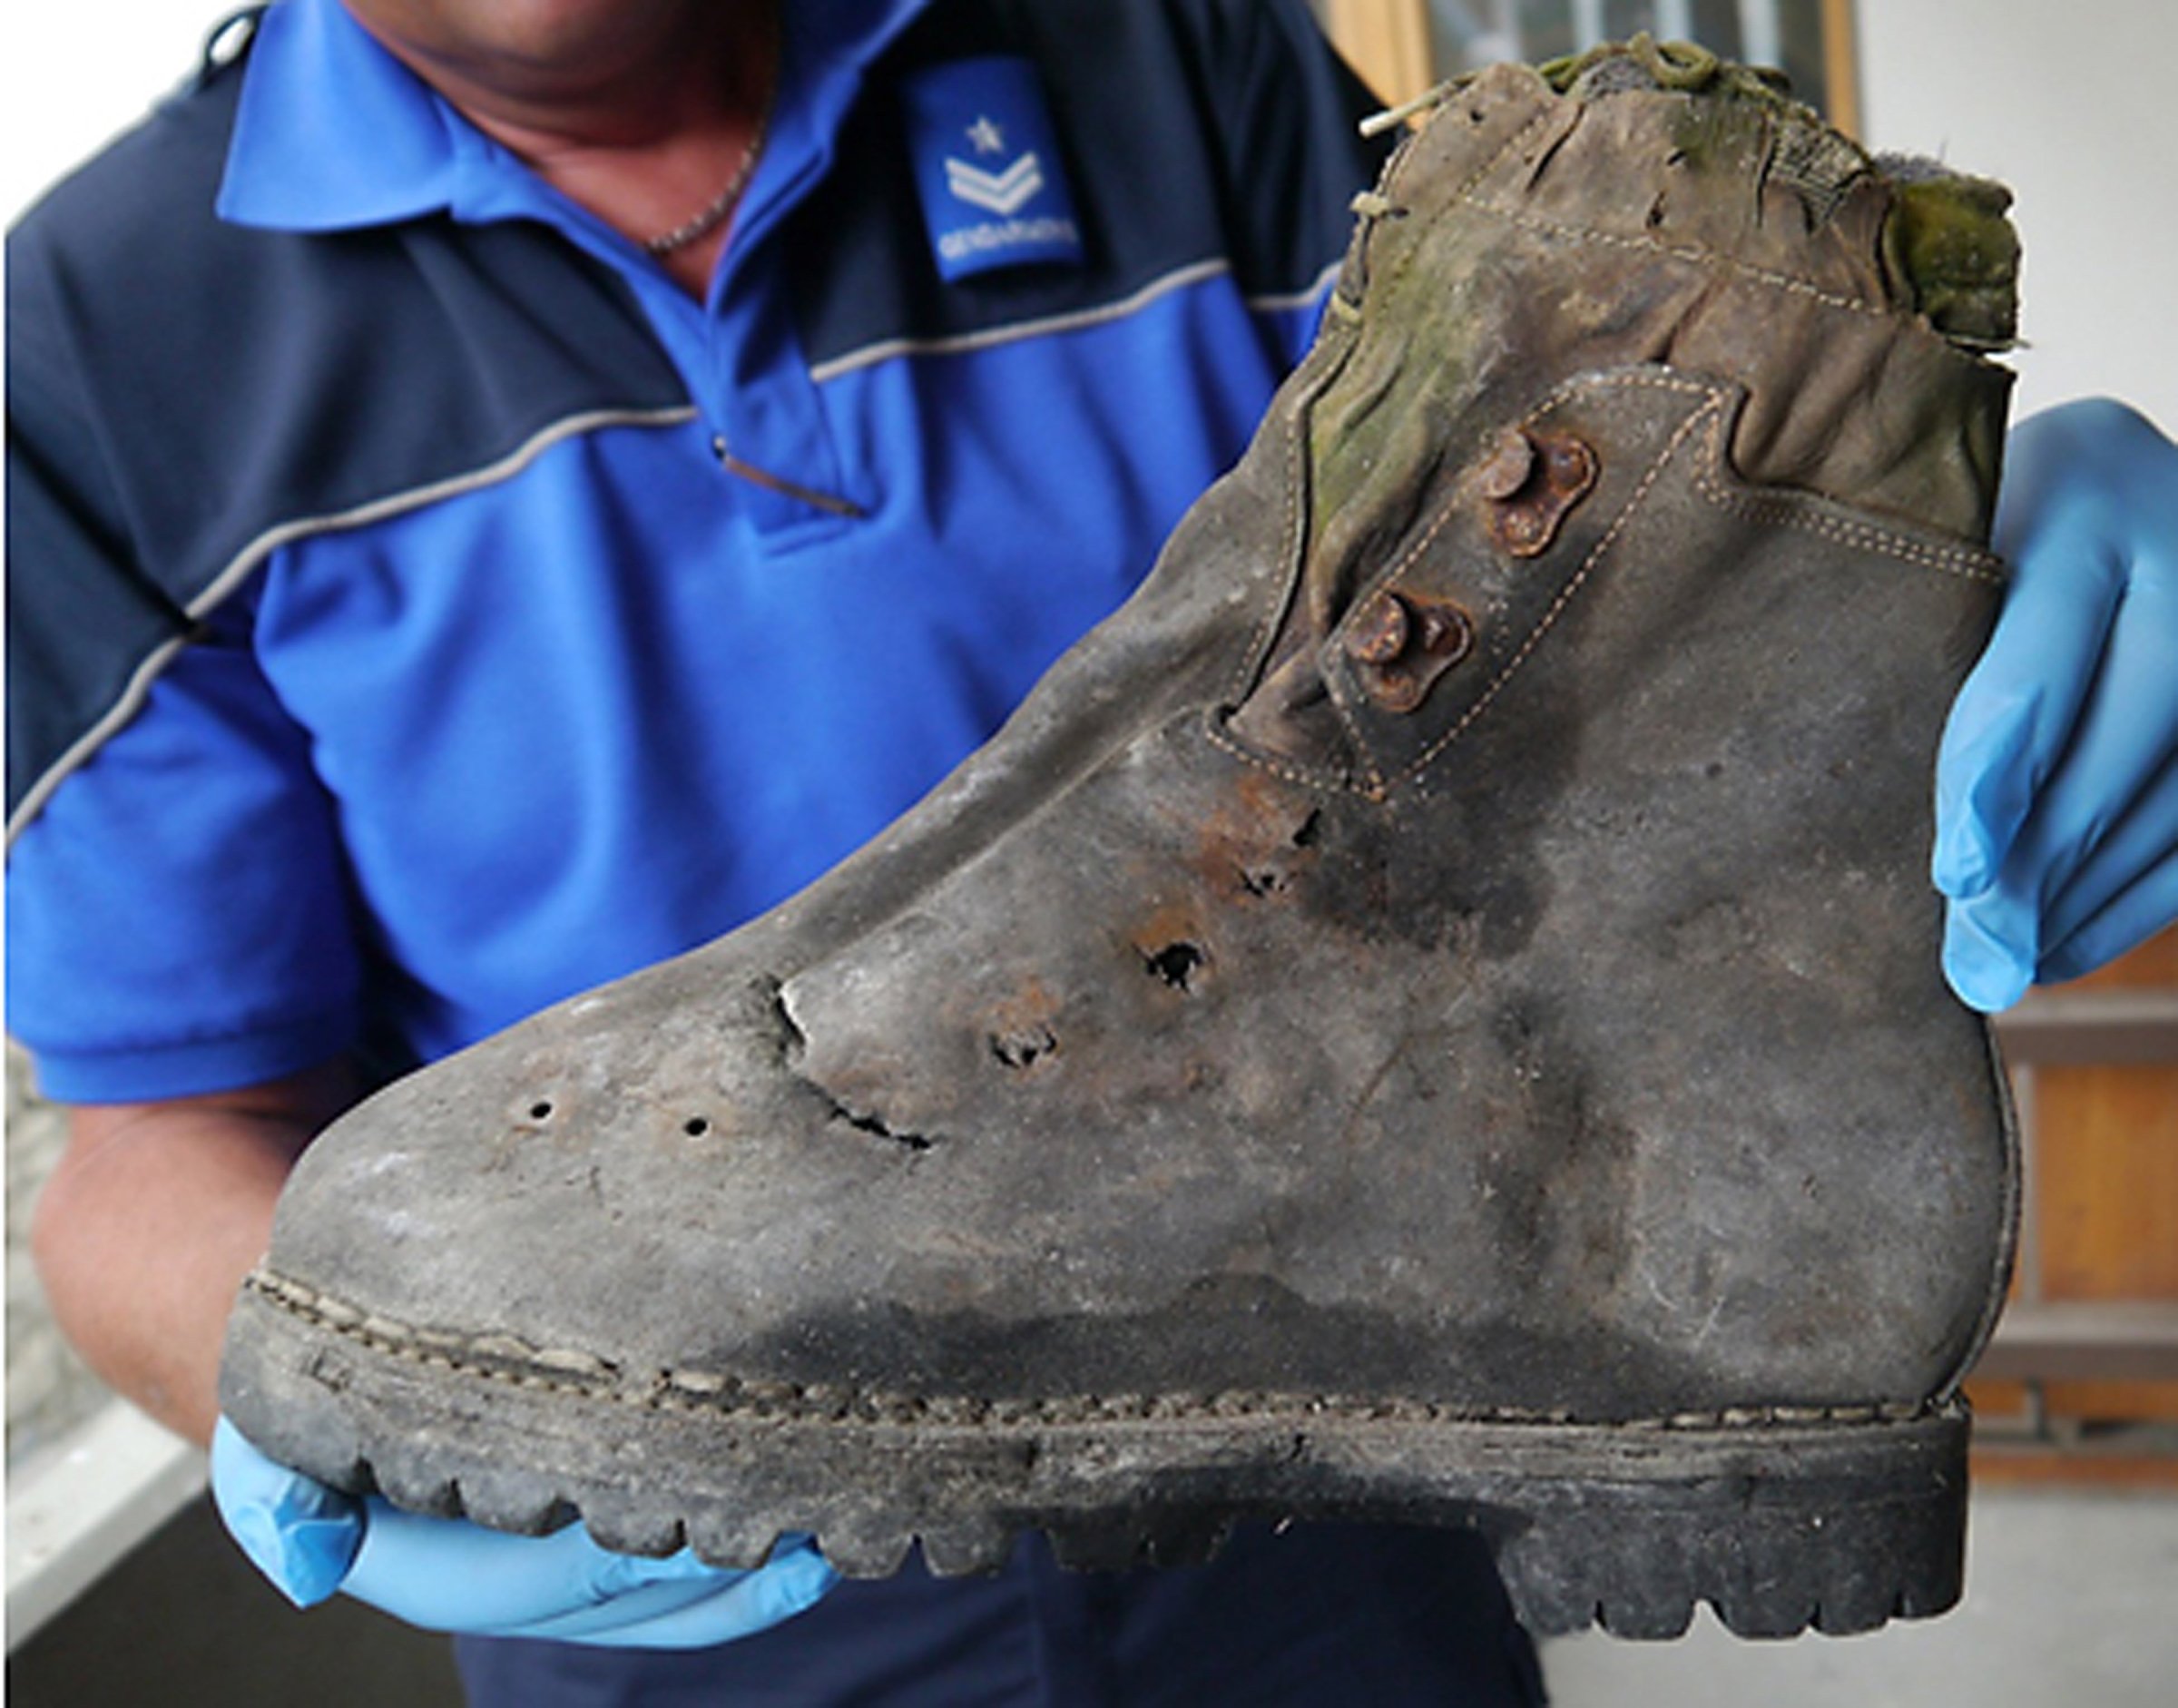 A mountain shoe found next to the remains of two Japanese climbers who disappeared in the Swiss Alps in 1970 on Aug. 6, 2015.